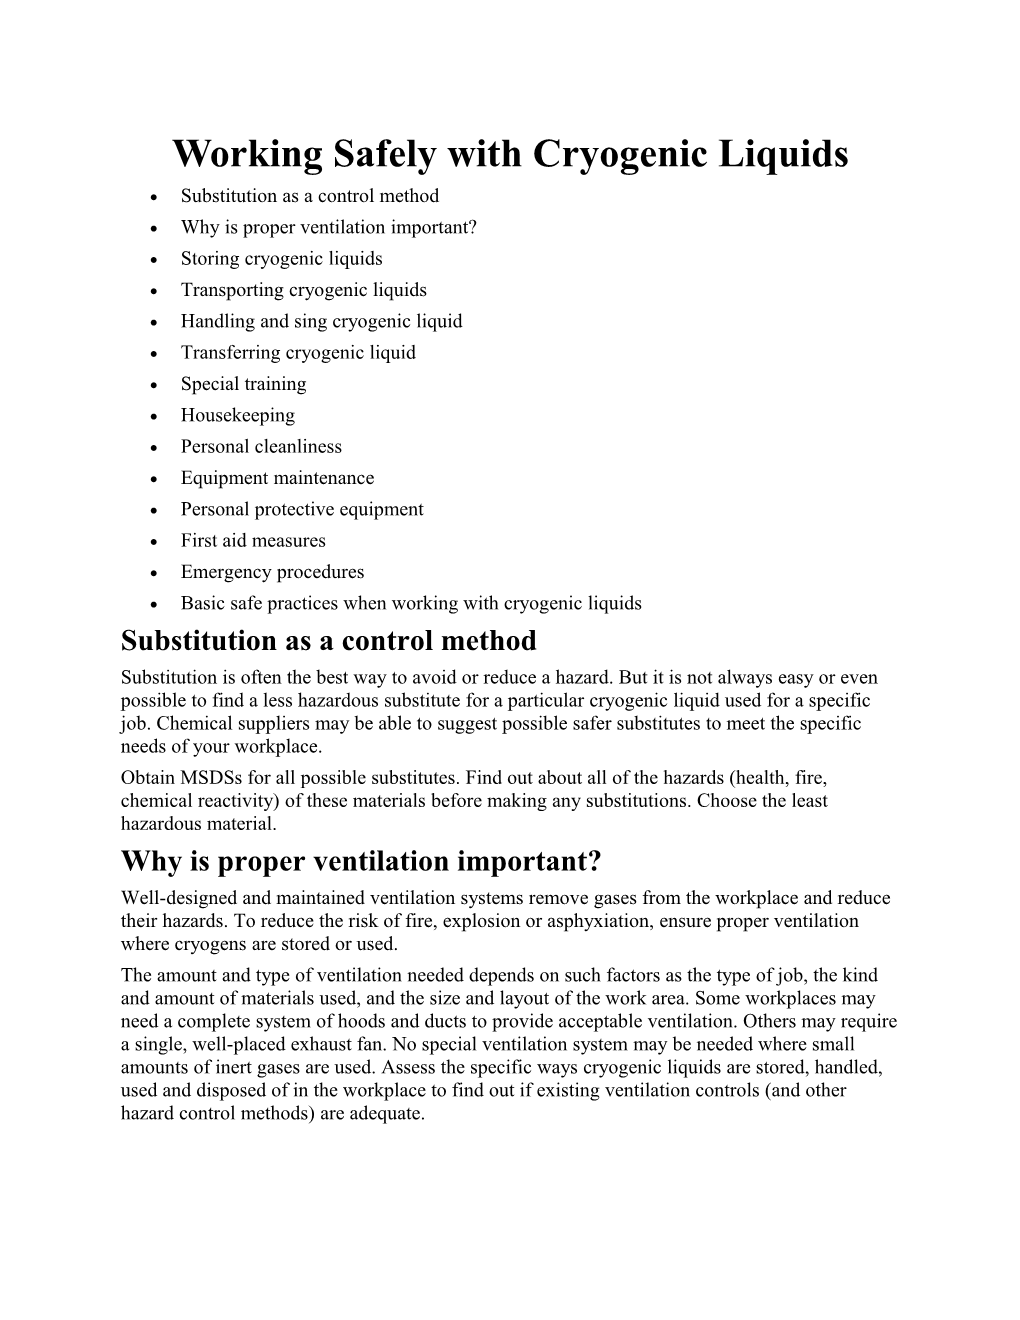 Working Safely with Cryogenic Liquids